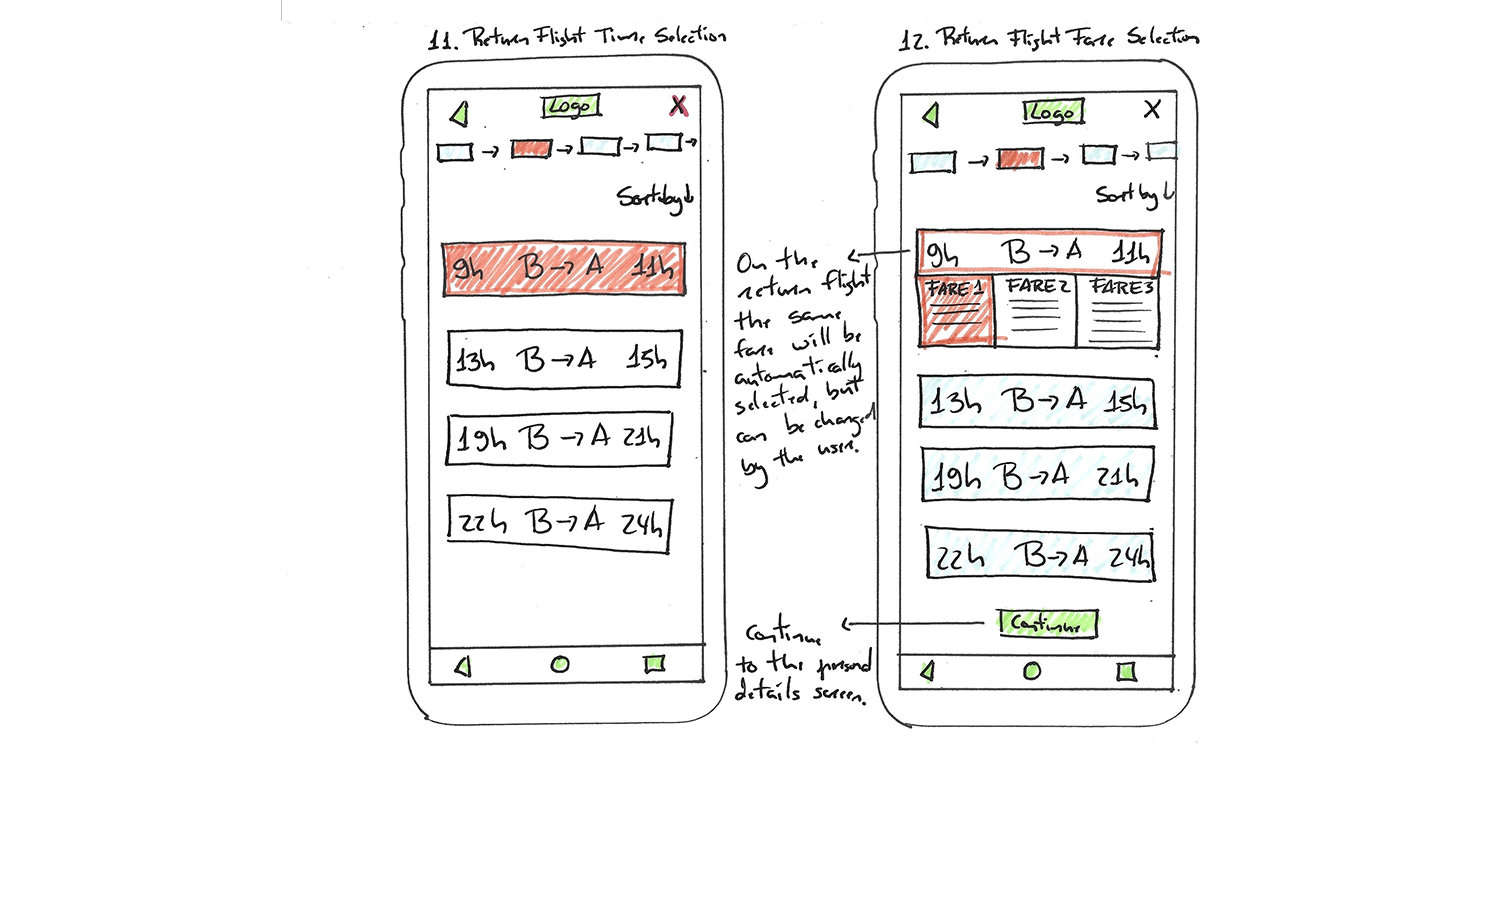 wireframes sketches